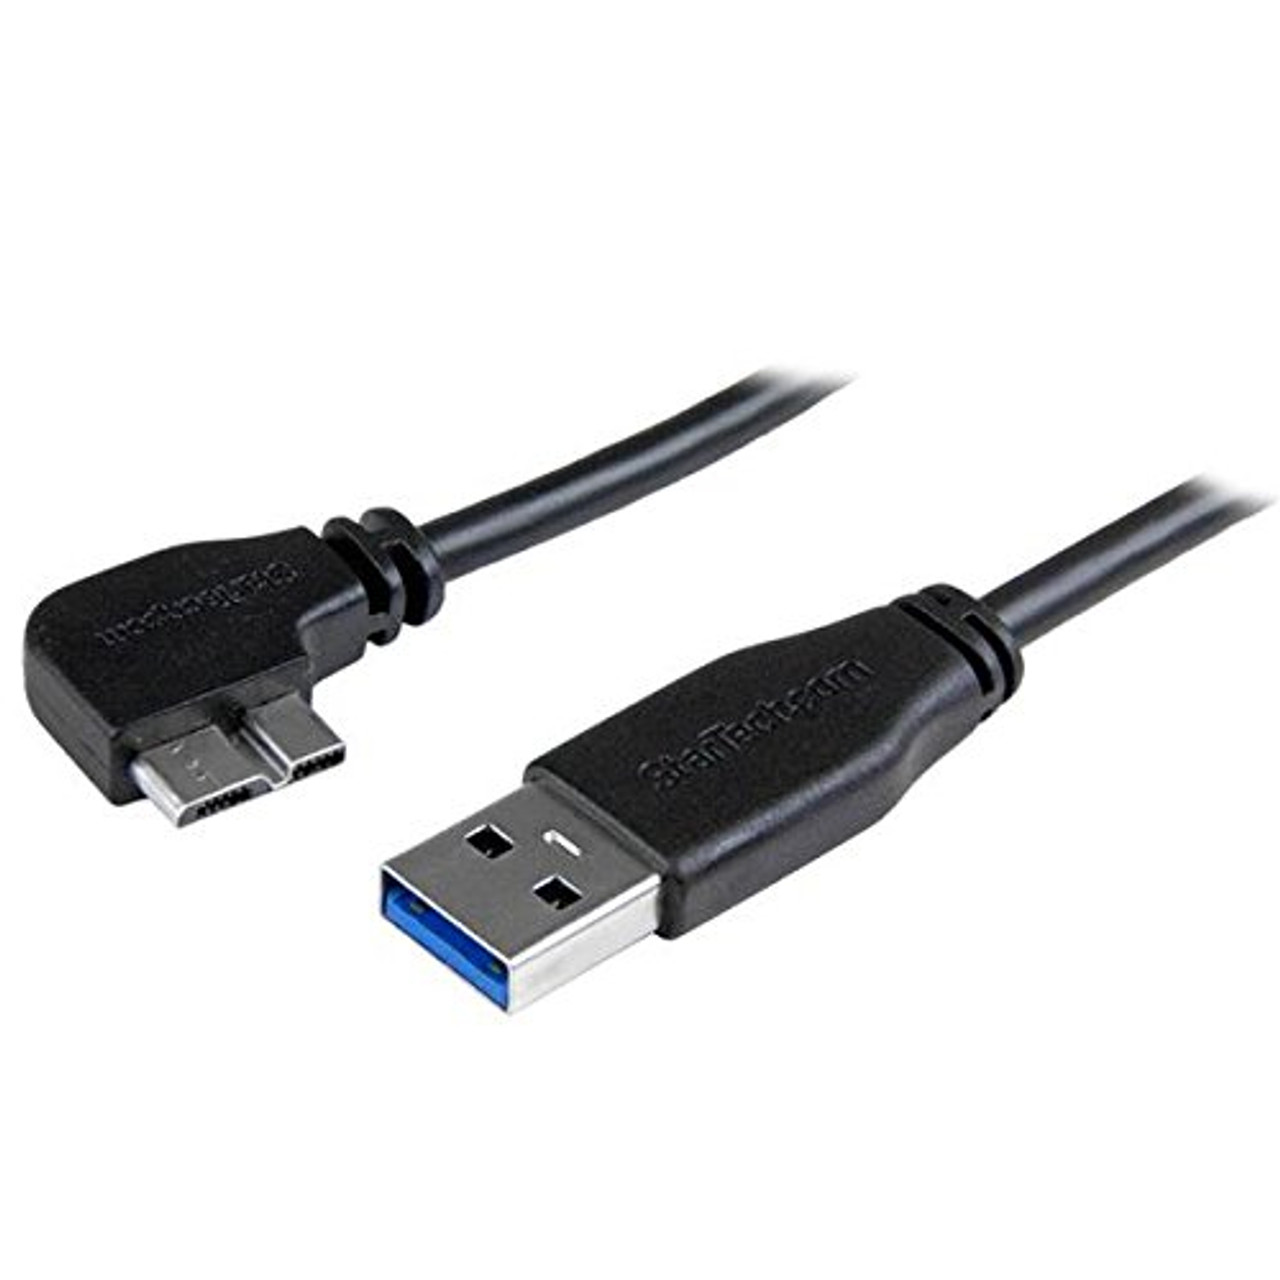 USB 3.0 Micro-B Cable - 1m